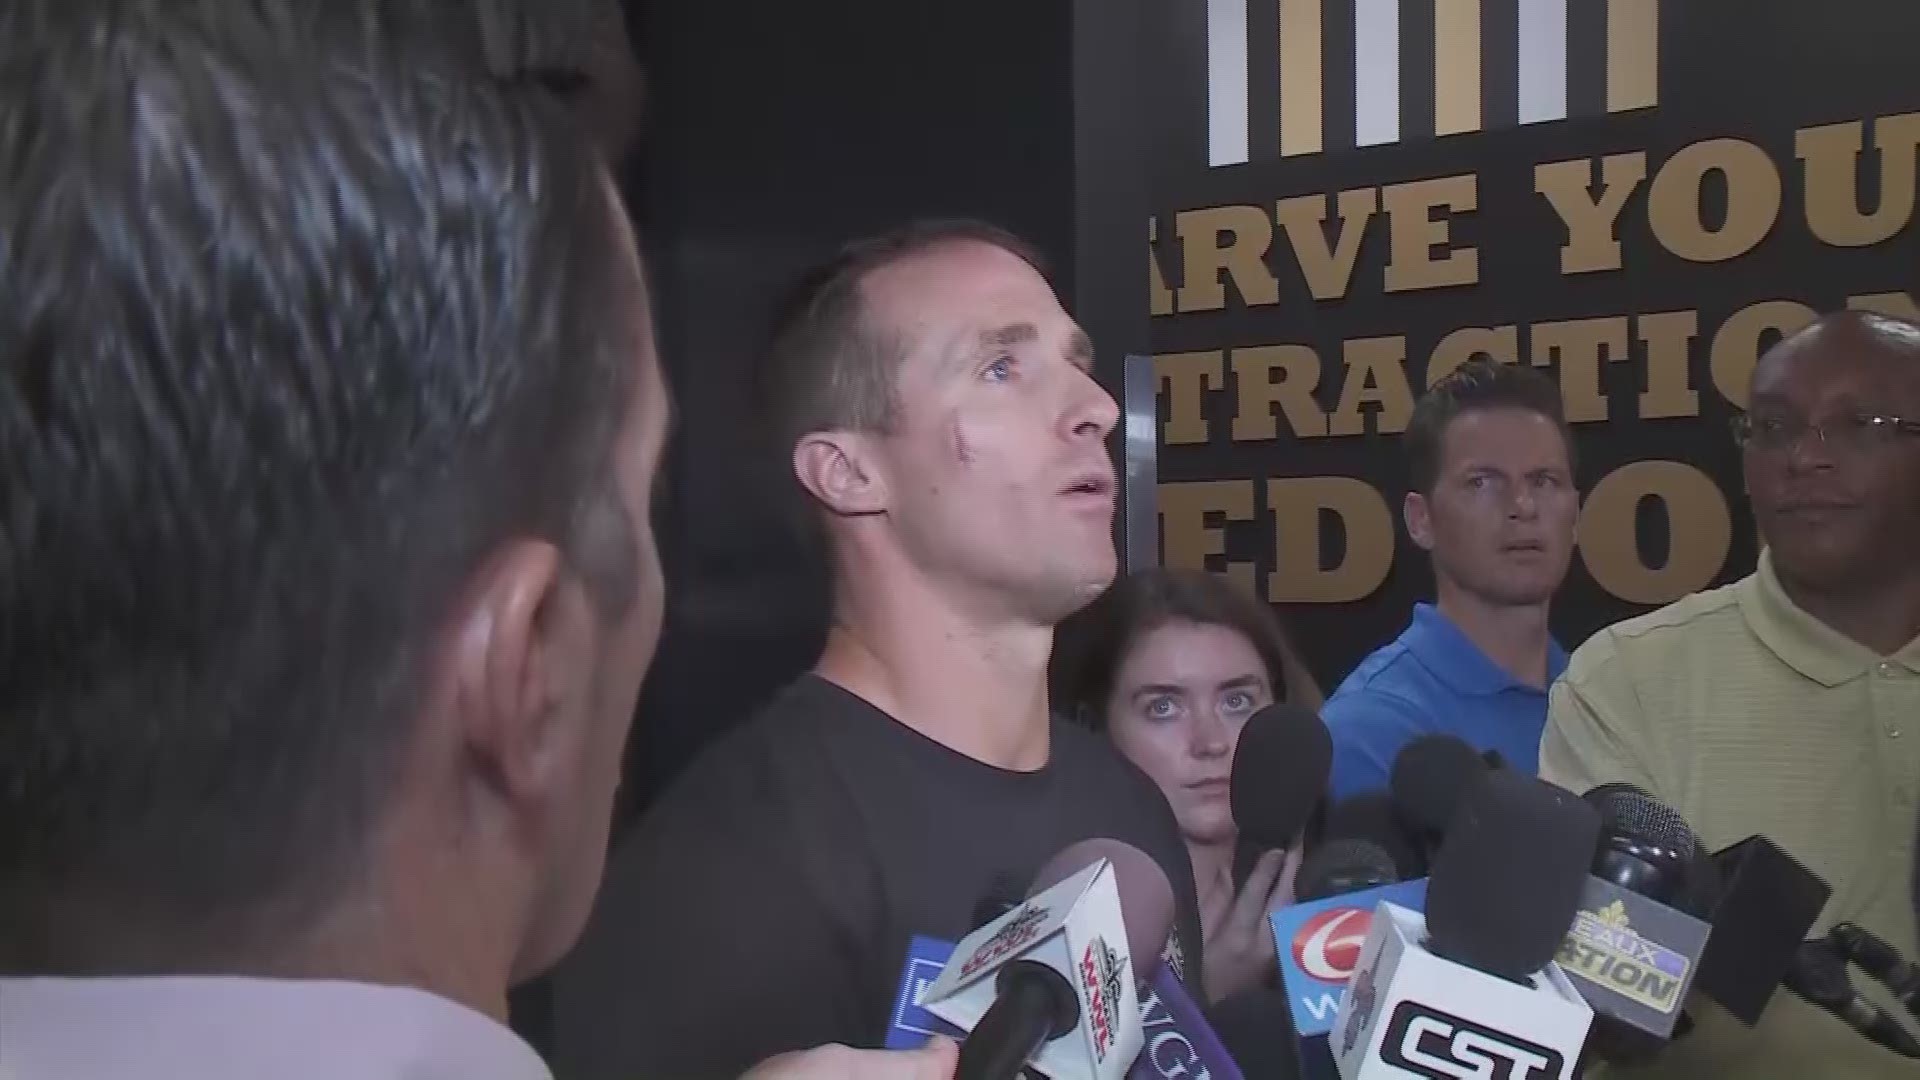 Brees said that he was unaware of the group's anti-LGBTQ message when he shot the ad for "Bring your Bible to School Day."